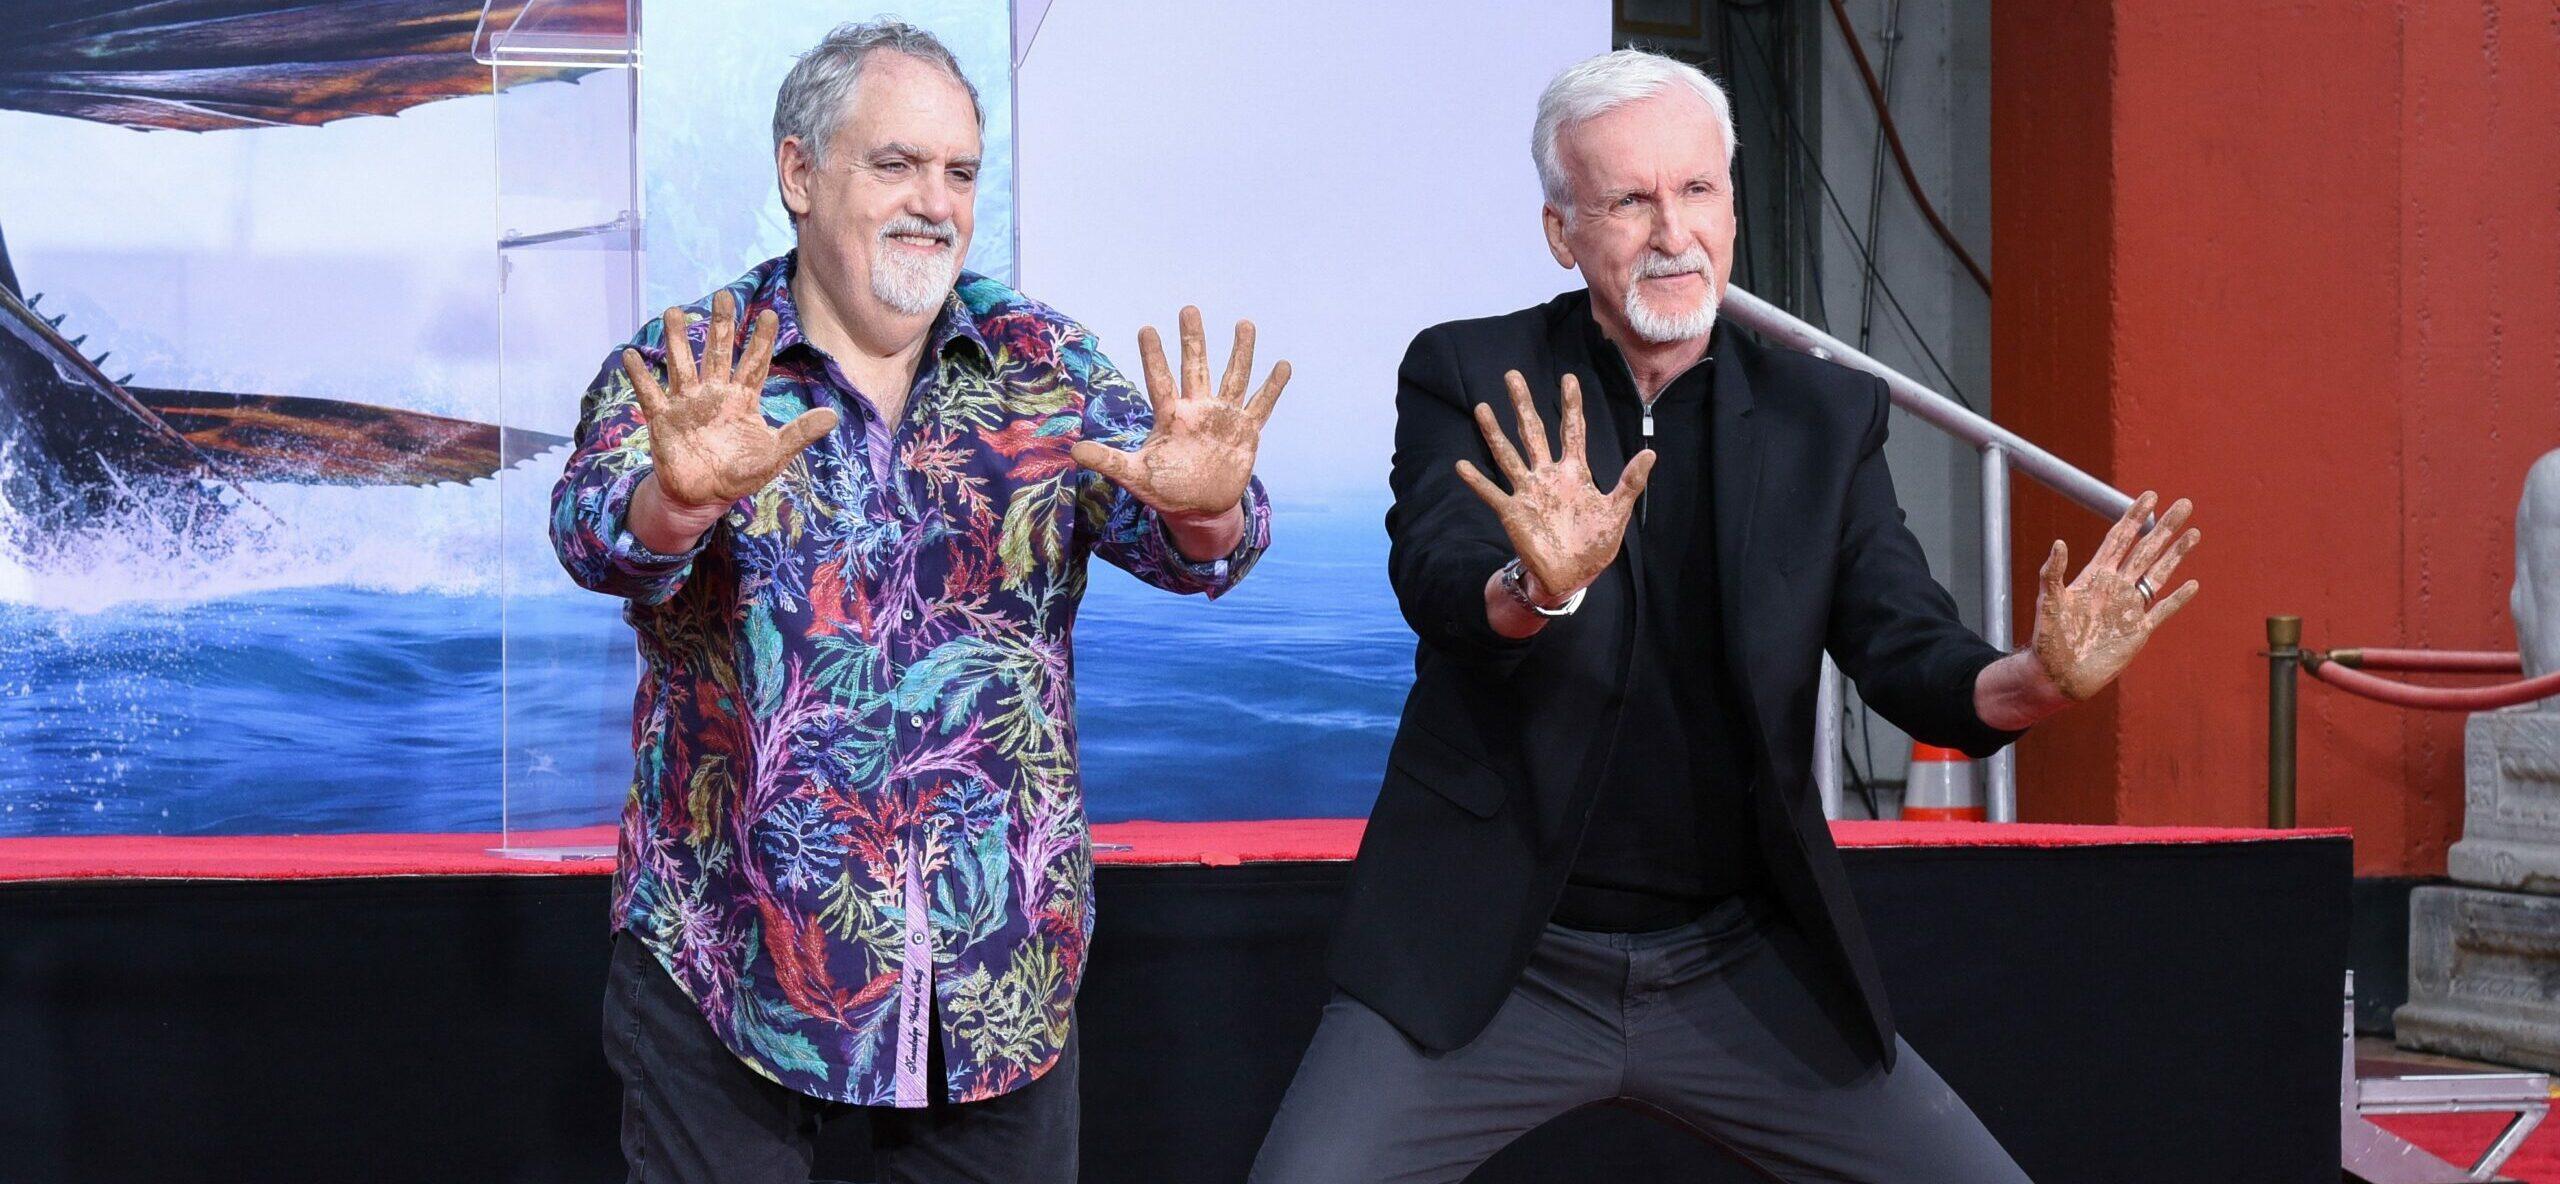 James Cameron And Jon Landau Hand And Footprint In Cement Ceremony